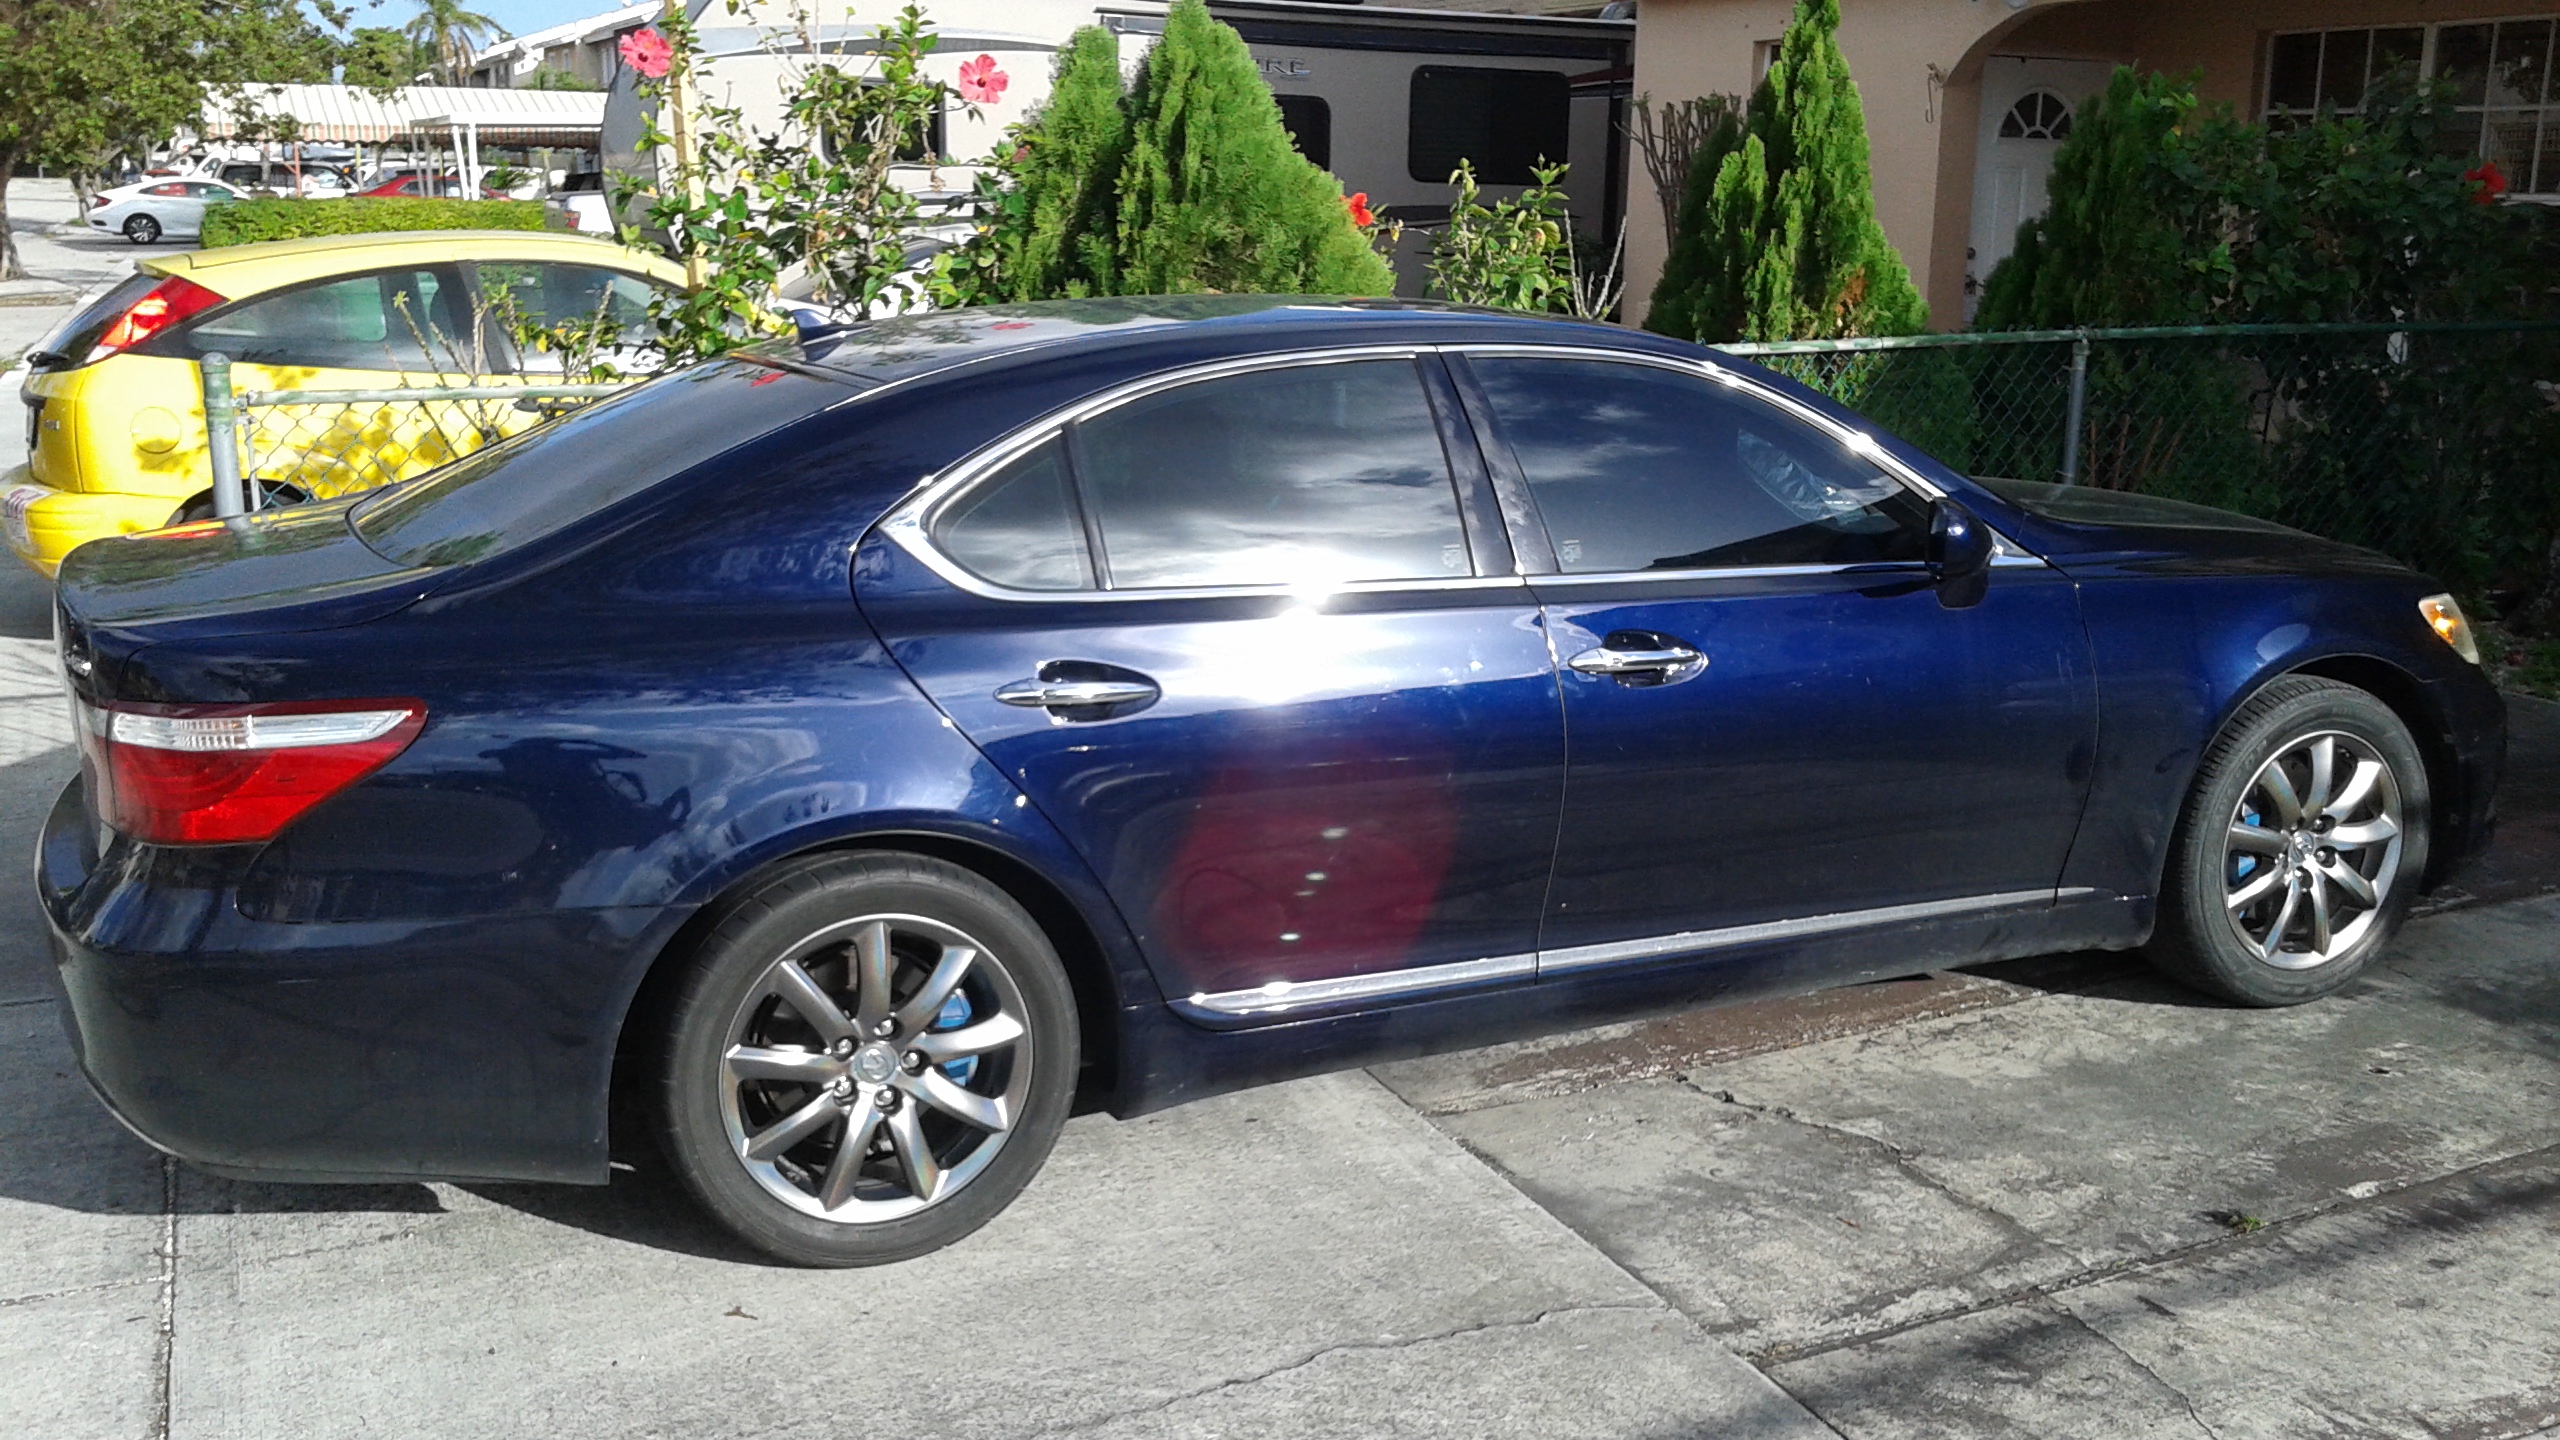 Painted OEM rims with ISF Rim Toyota paint code (1E3) and Clear Effex clear  coat - ClubLexus - Lexus Forum Discussion